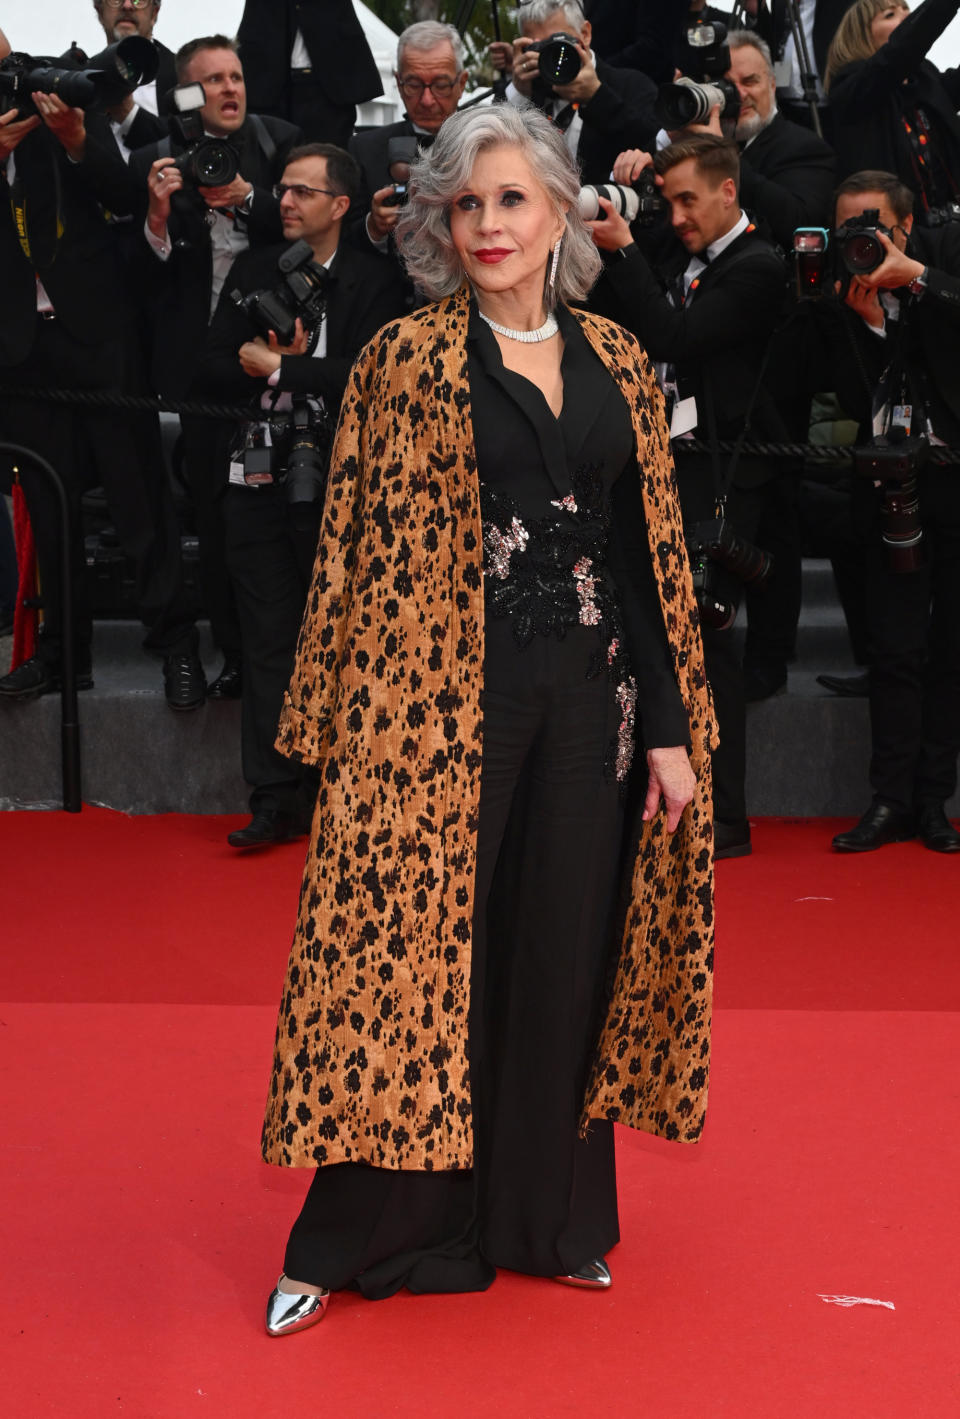 Jane Fonda at "The Second Act" screening & Opening Ceremony Red Carpet at the 77th Cannes Film Festival held at the Palais des Festivals on May 14, 2024 in Cannes, France.